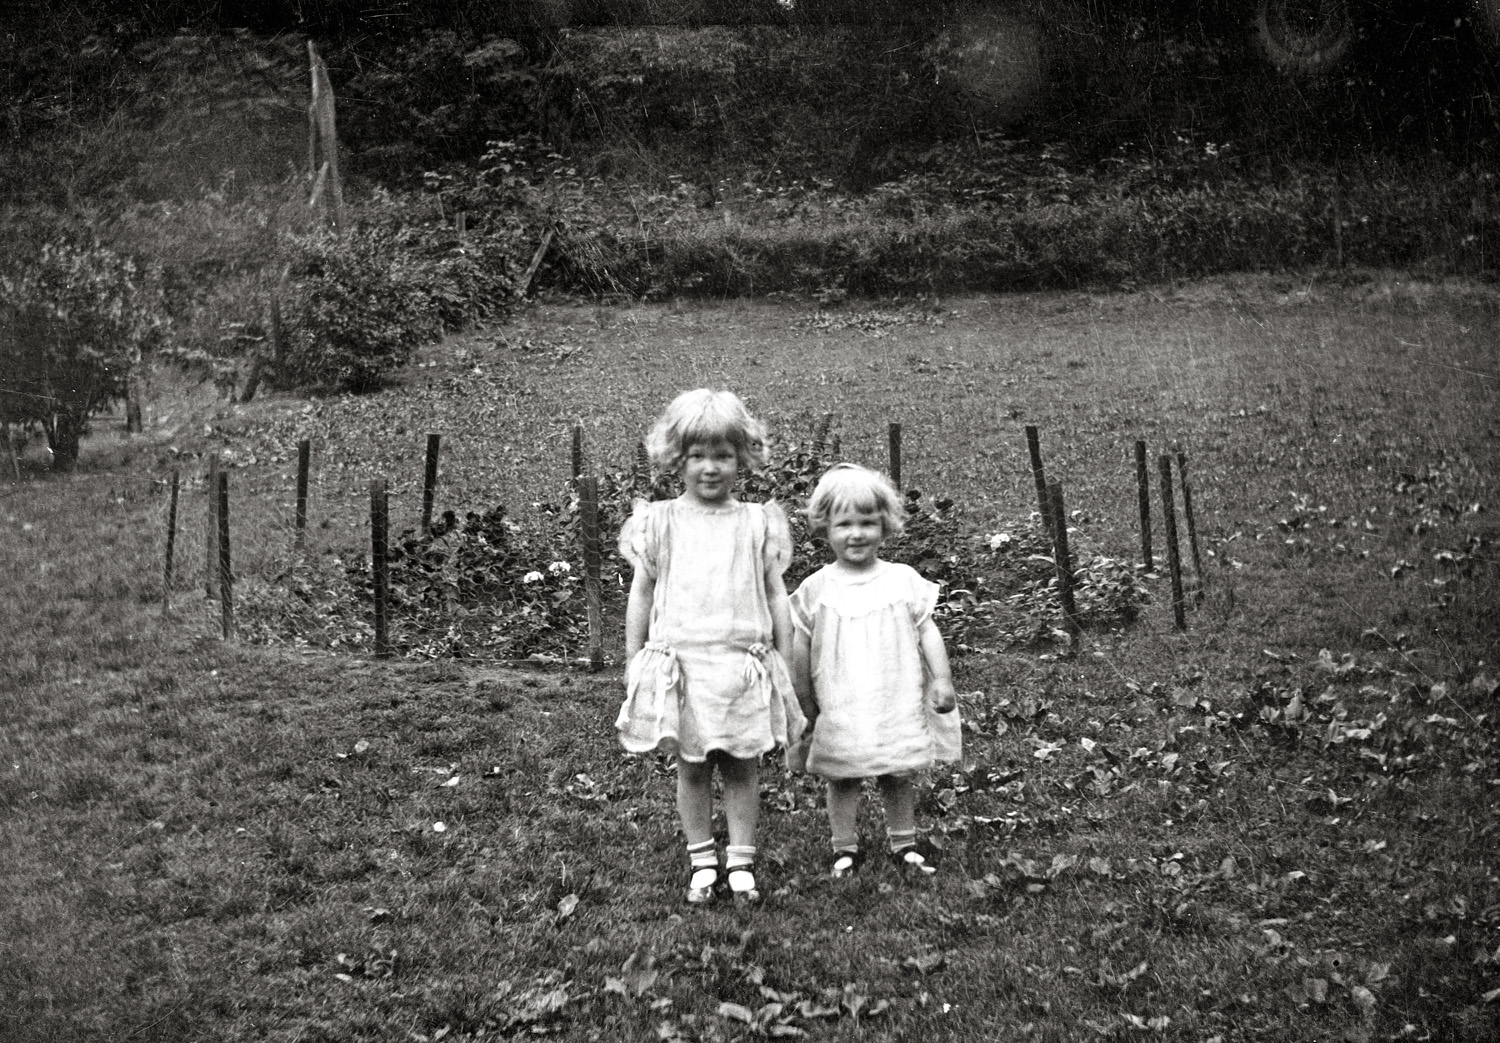 East Liverpool, Ohio, 1924. The little girl is my mom, who turned 91 in August and the big girl is my aunt, now 94. Both still drive and get to the race track to play the slots twice a month. My great-grandfather had tennis courts and green houses on Dresden Avenue, and was an avid gardener too. View full size.